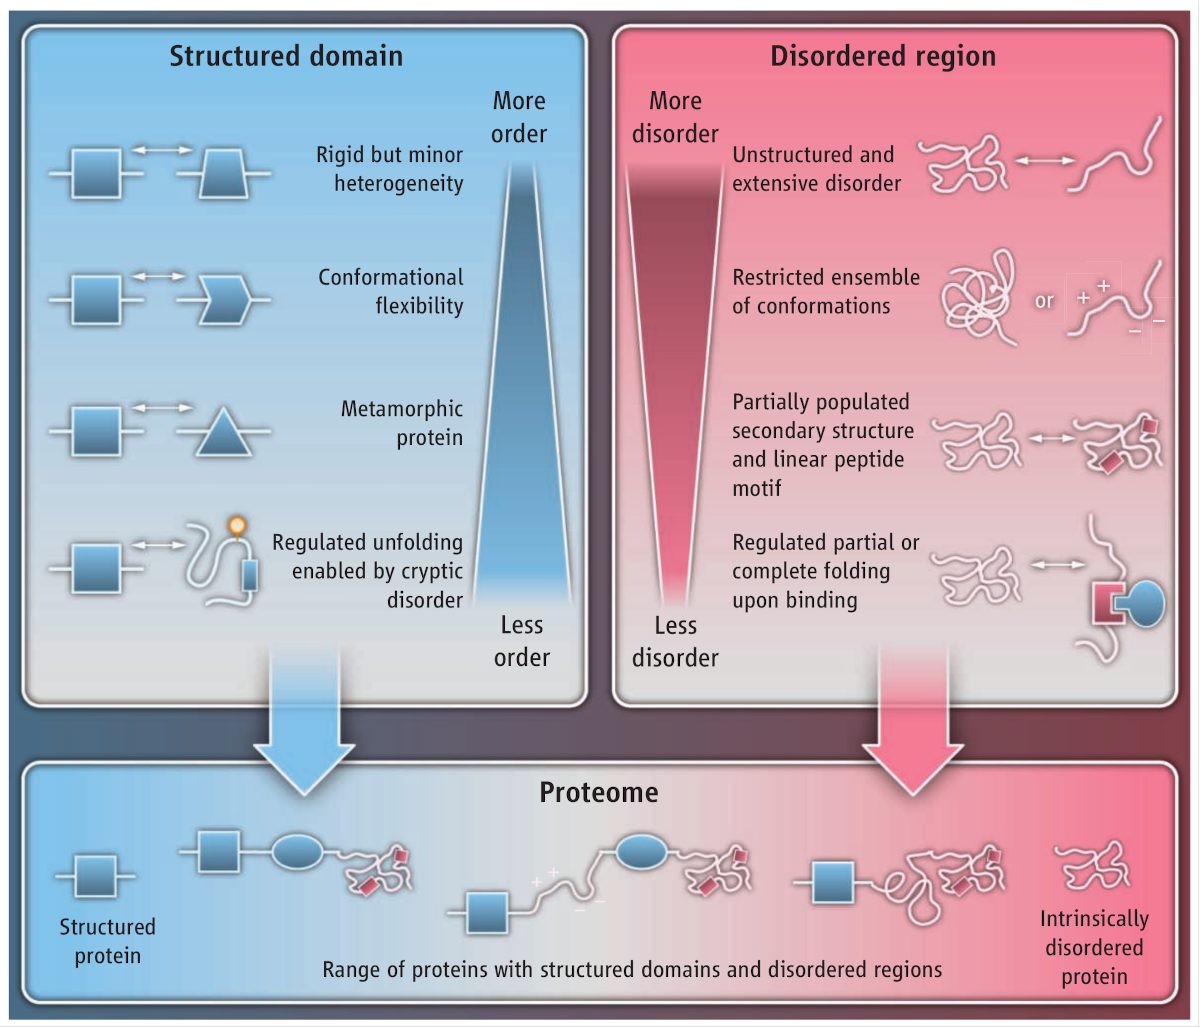 Why study intrinsically disordered proteins?